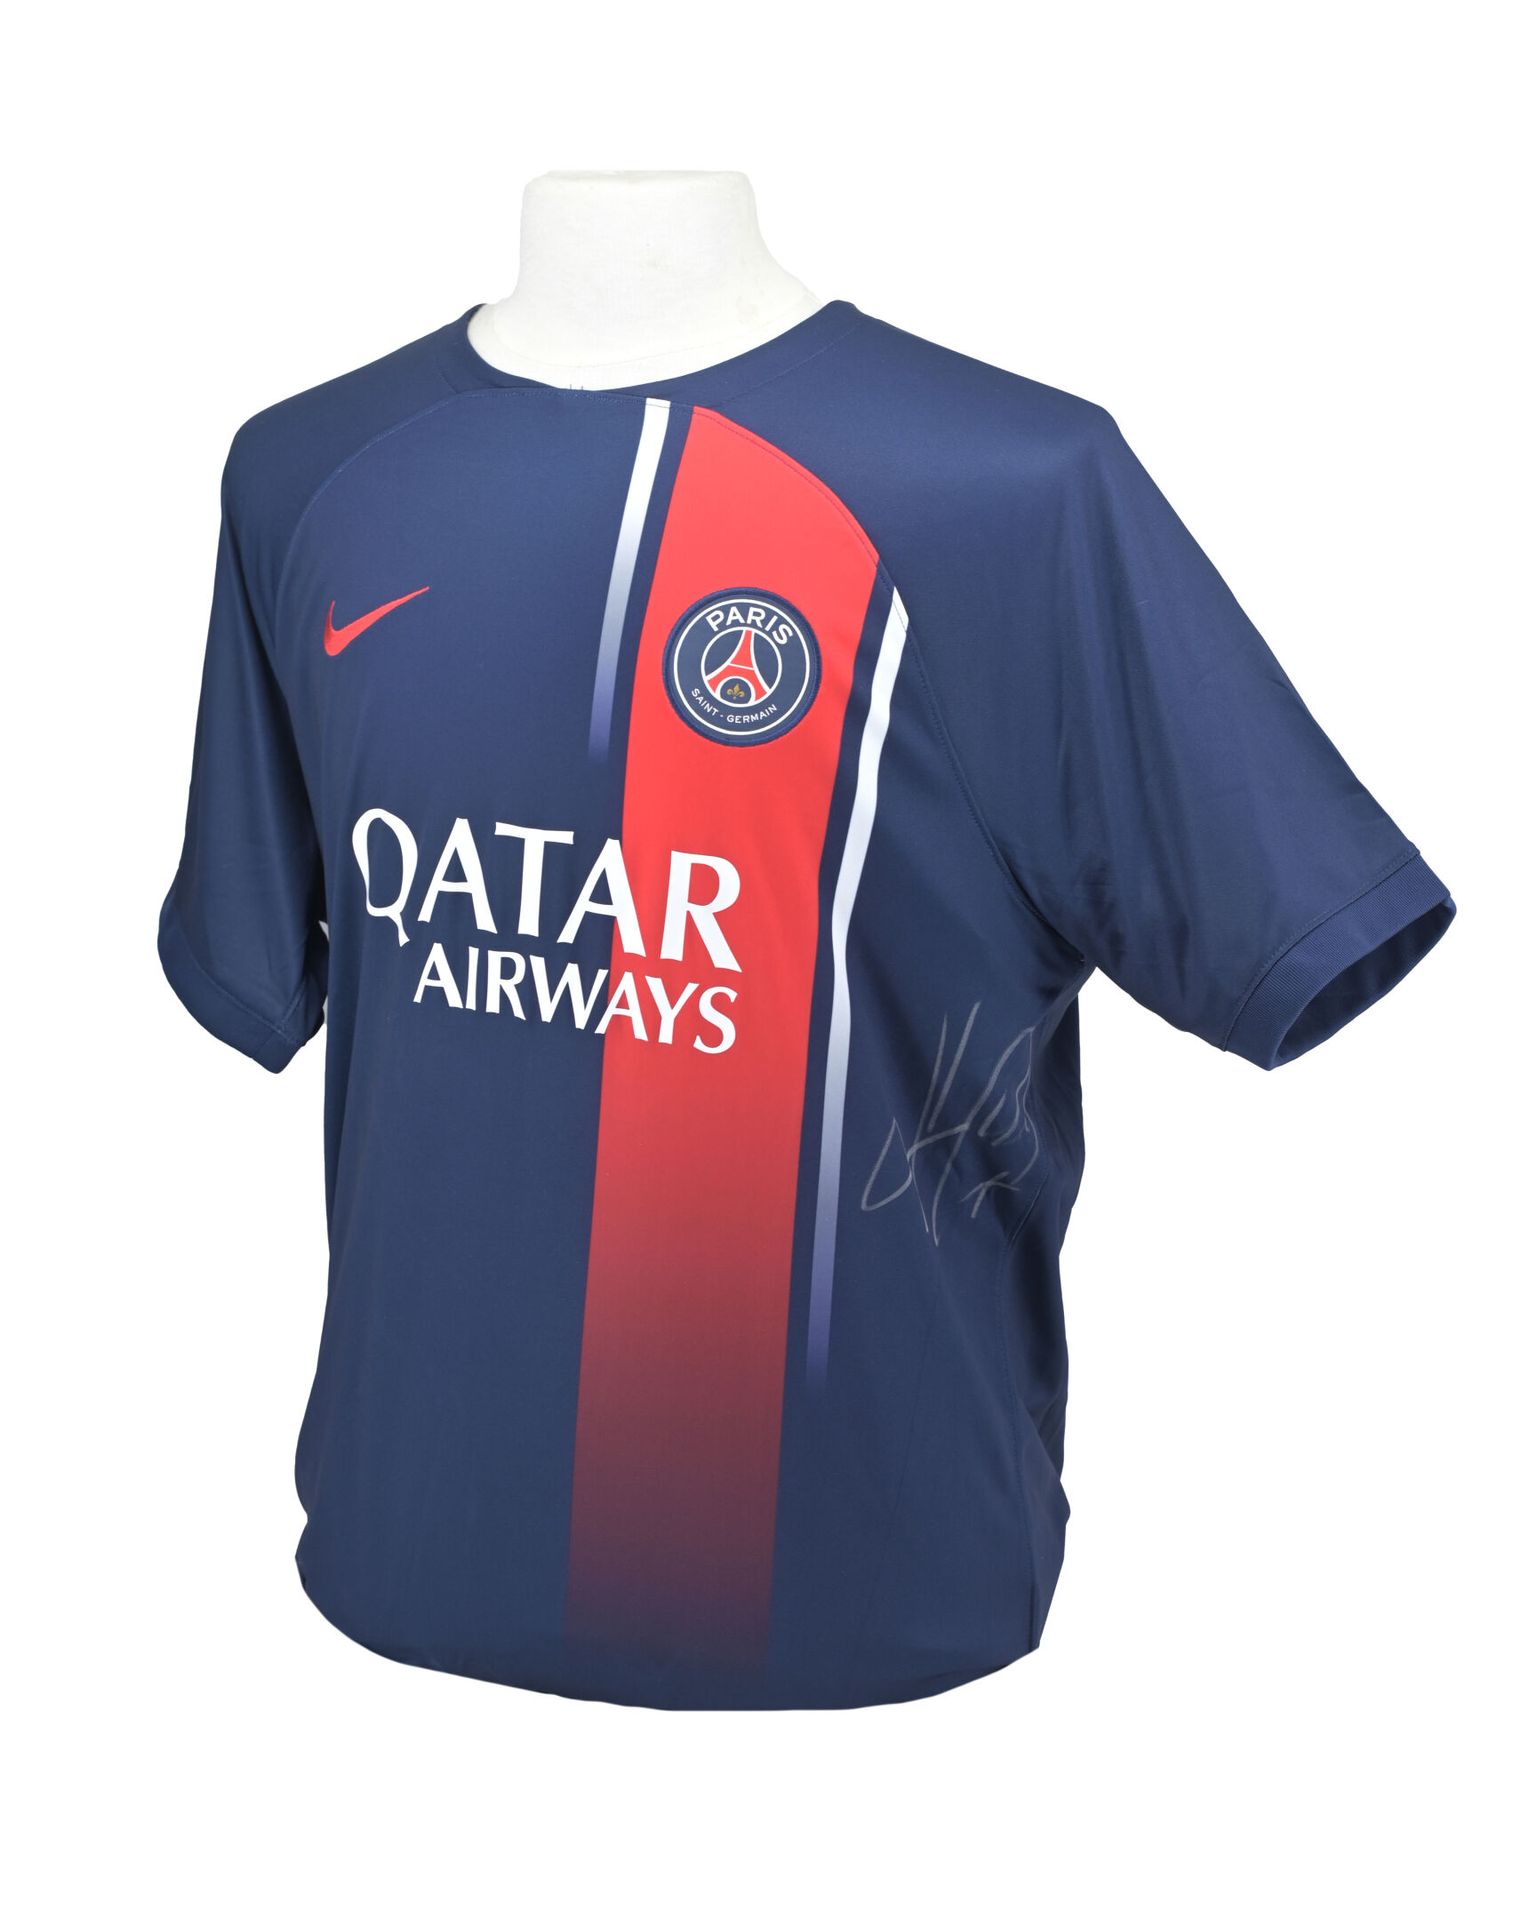 Null Nike replica PSG jersey signed by Killian Mbappé

Provenance : 
- Private c&hellip;